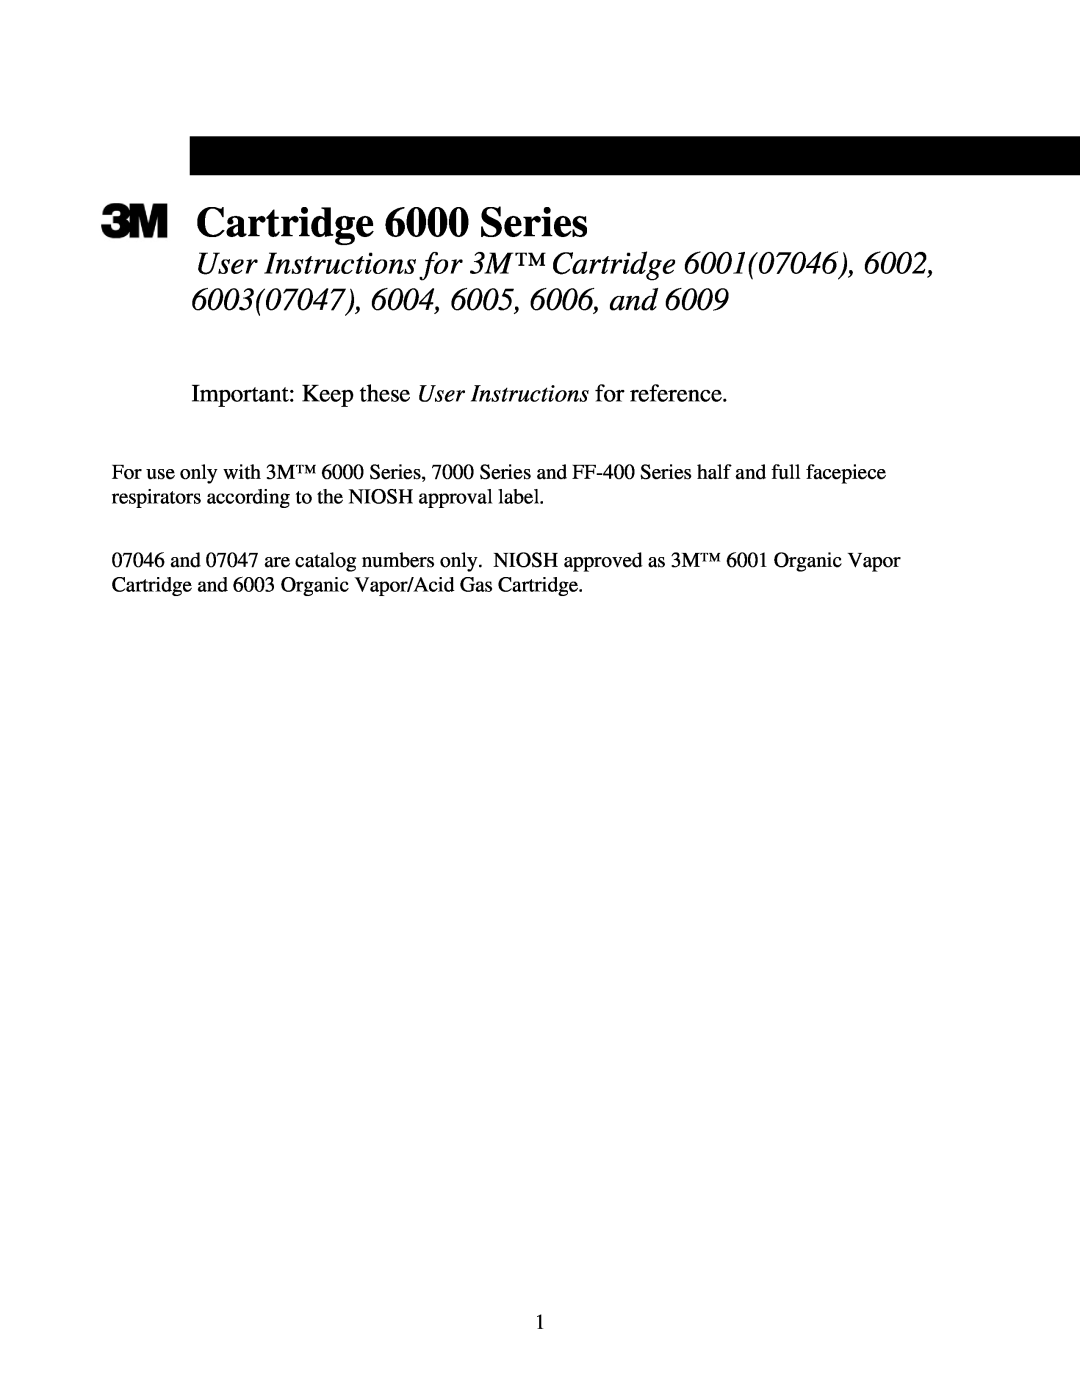 3M 6006, and 6009, 6004, 6001(07046), 6002 manual Cartridge 6000 Series, Important Keep these User Instructions for reference 